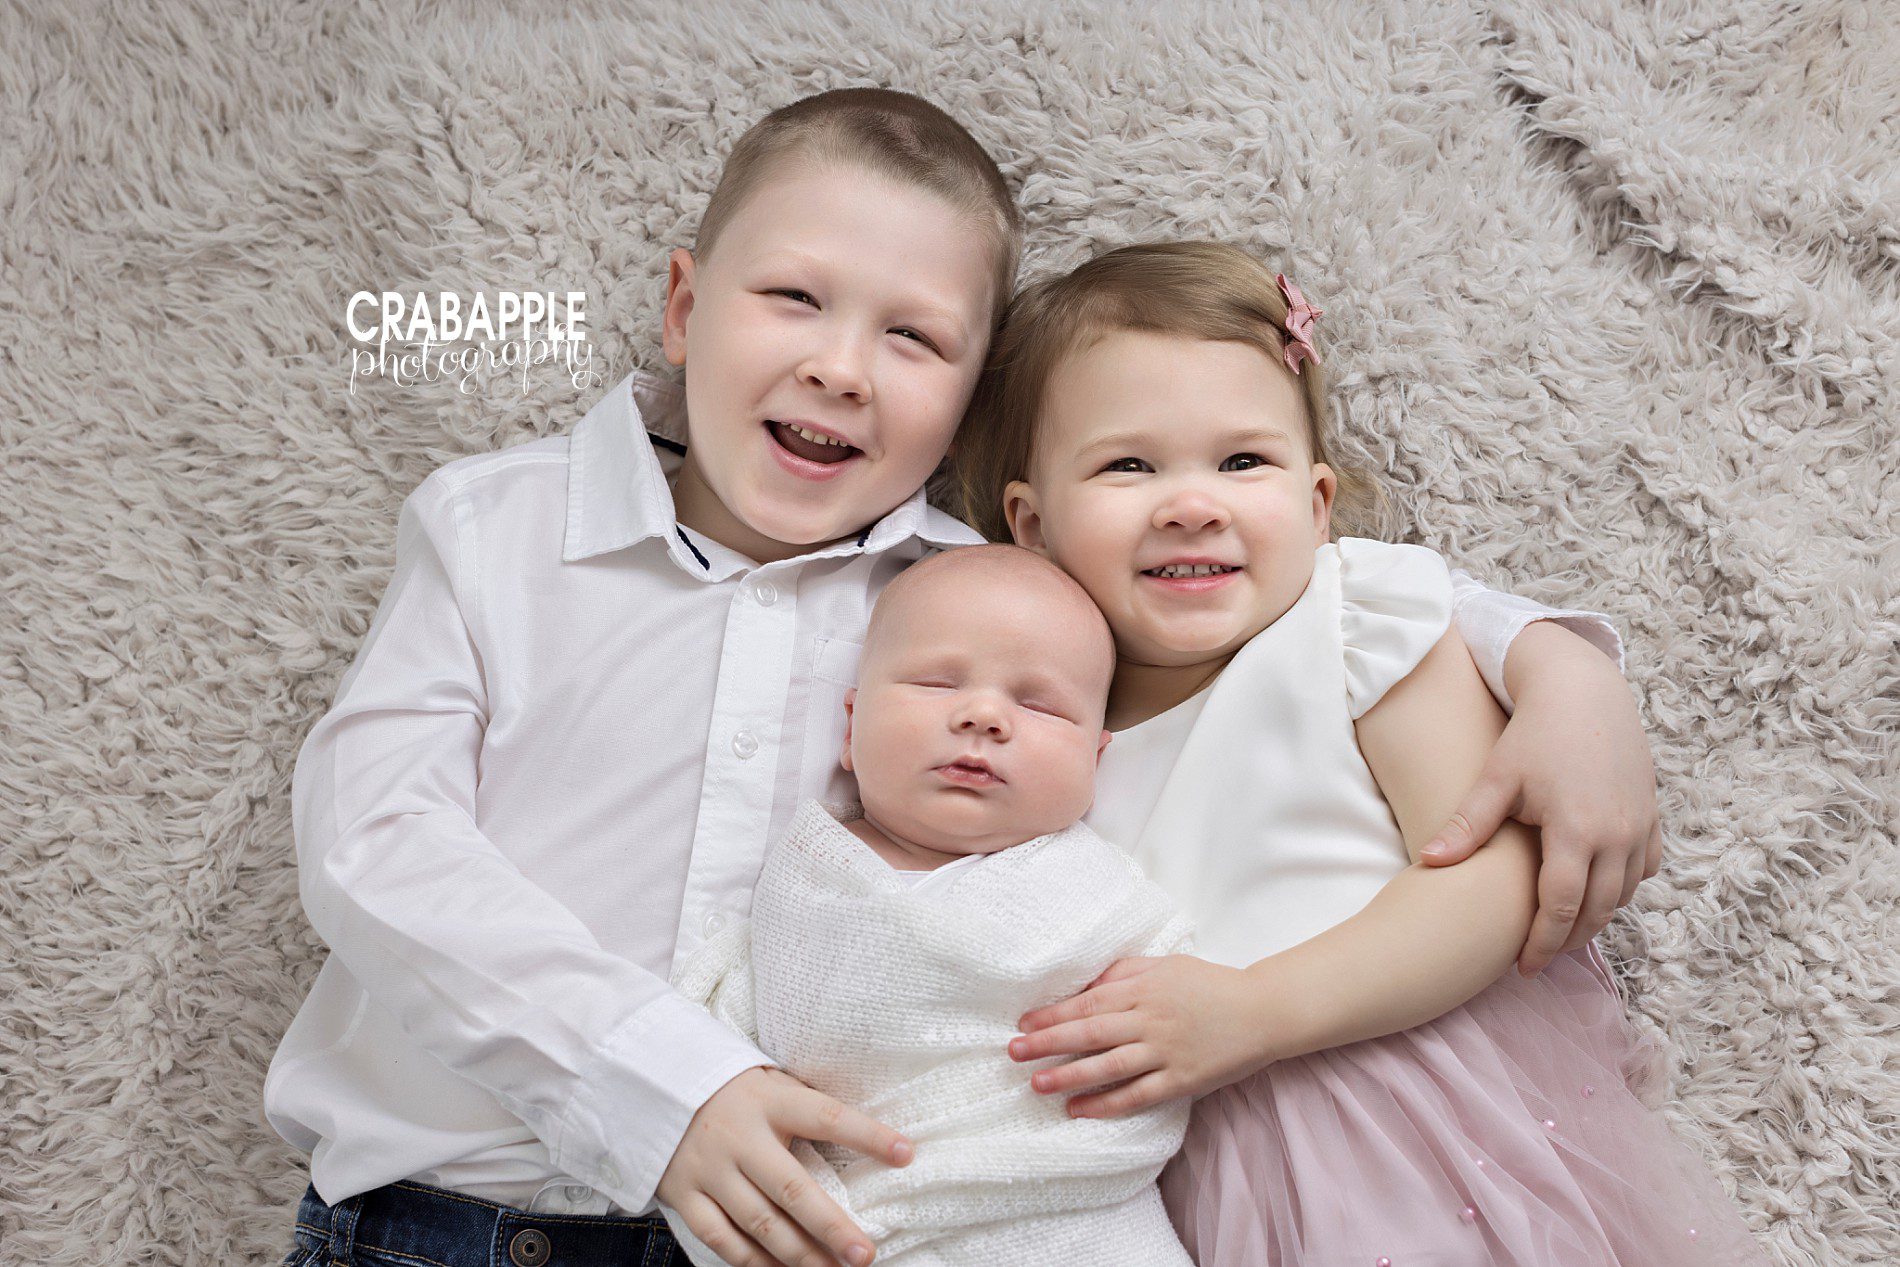 Sibling photos with newborn baby brother.